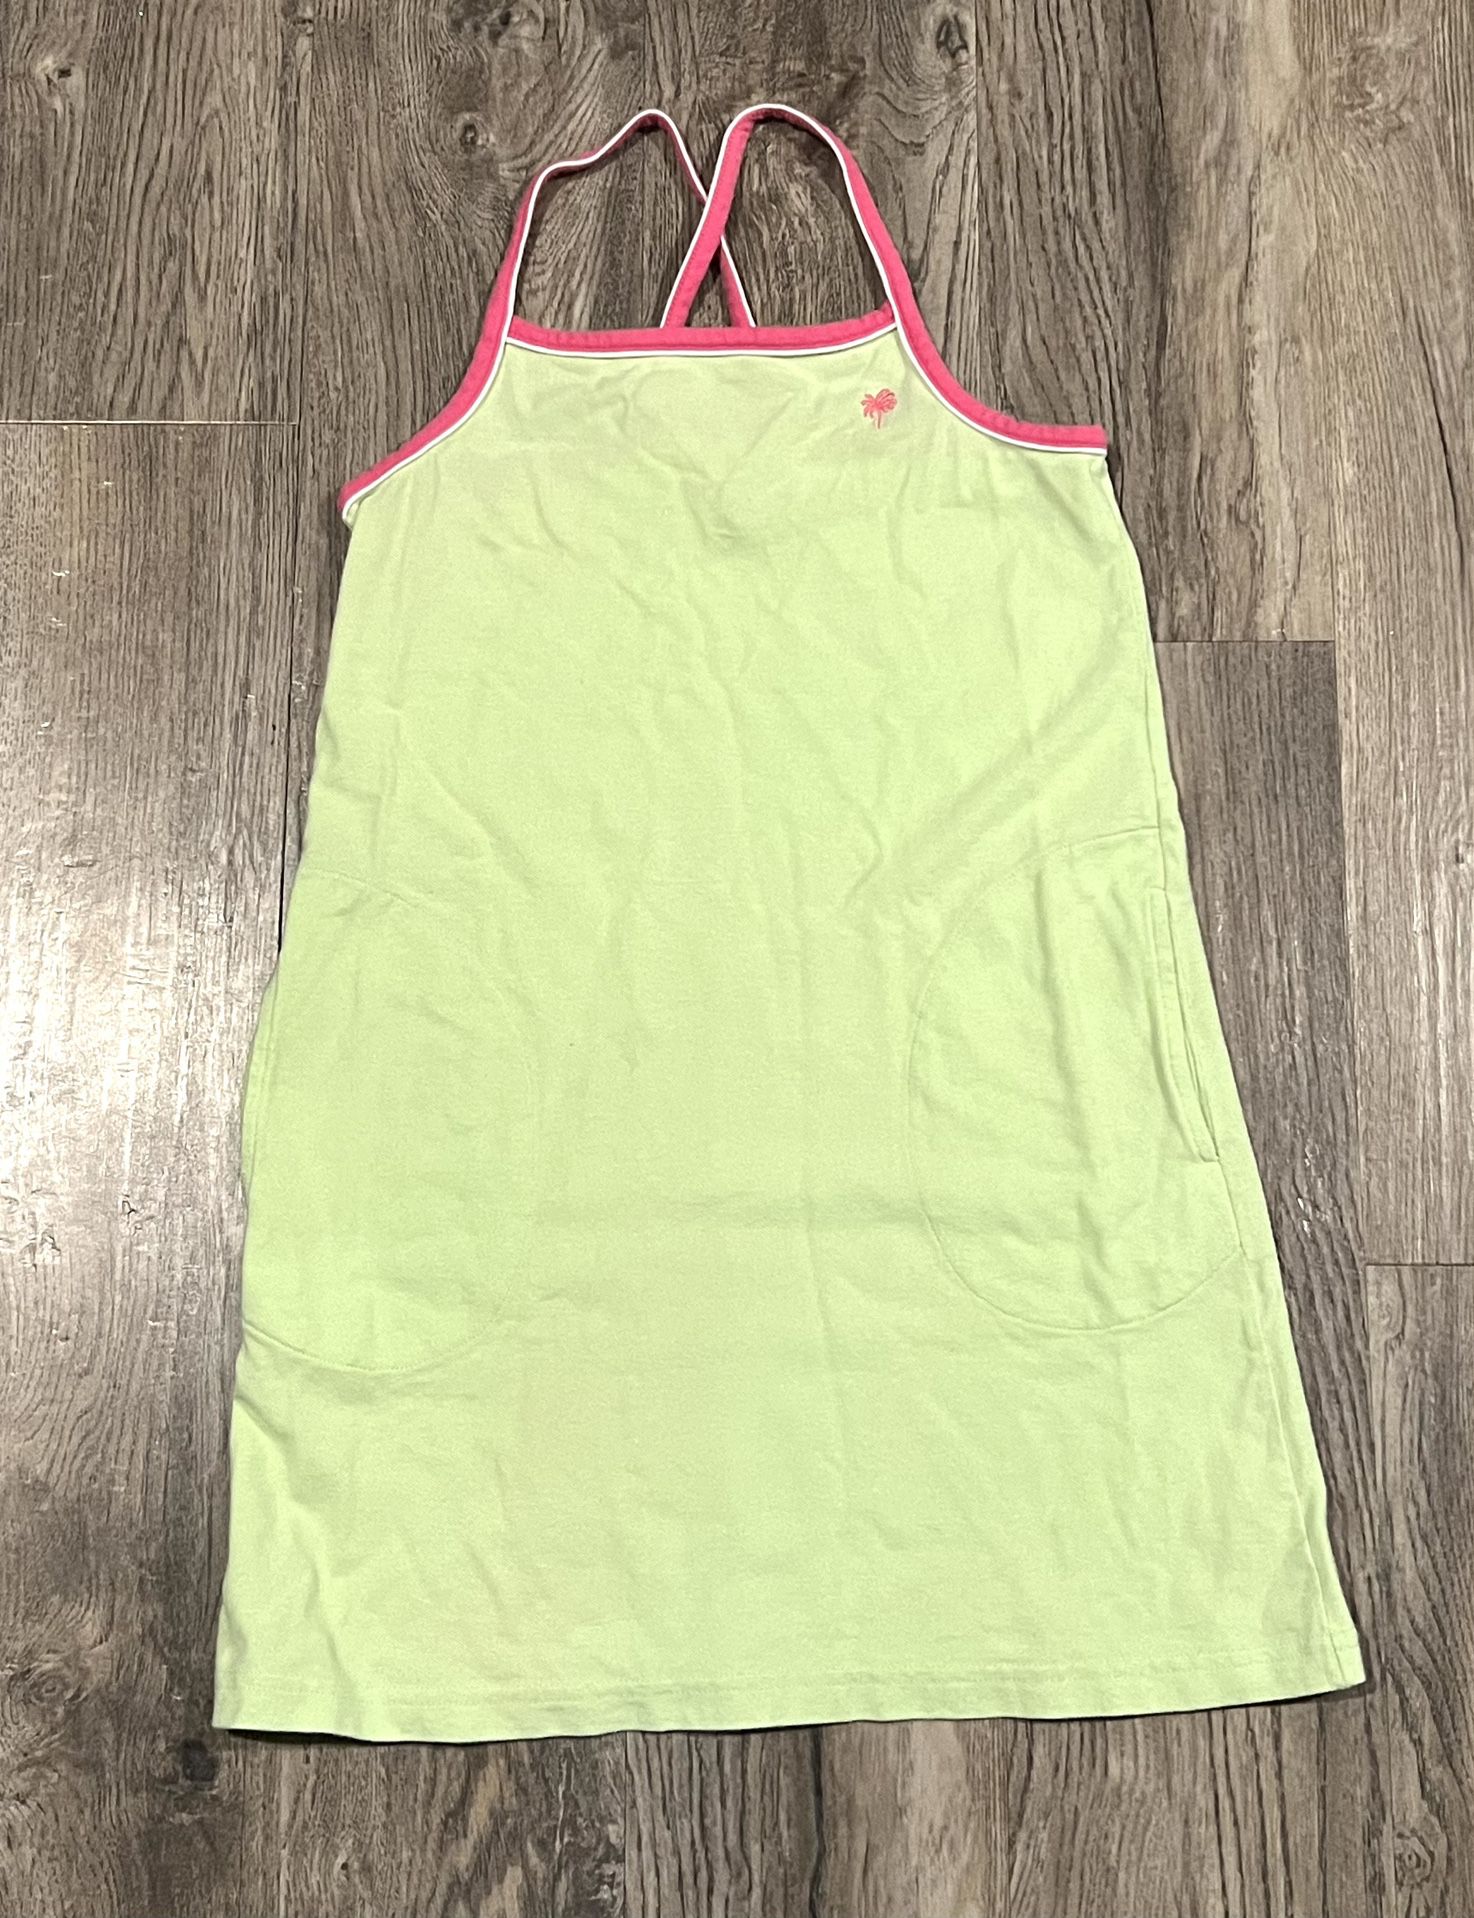 Lily Pulitzer Girls Tank Dress. Lime Green with Pink Accents. Size 10. 